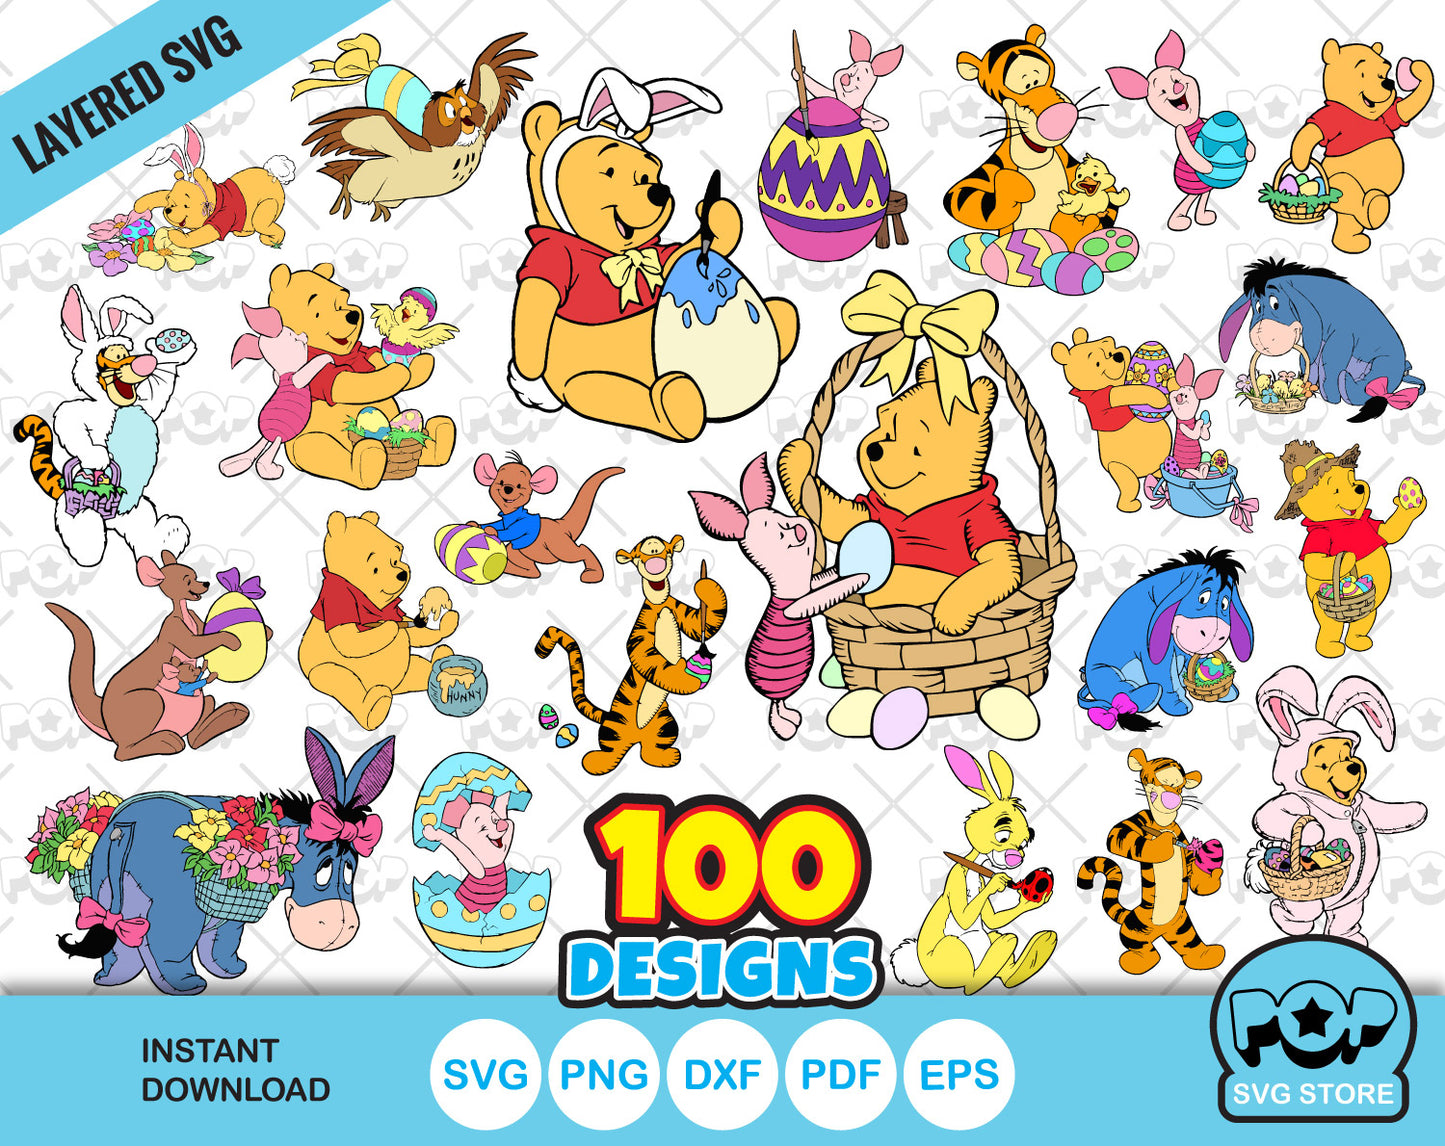 Pooh and Friends Easter clipart set, Disney Easter SVG cut files for Cricut / Silhouette, instant download